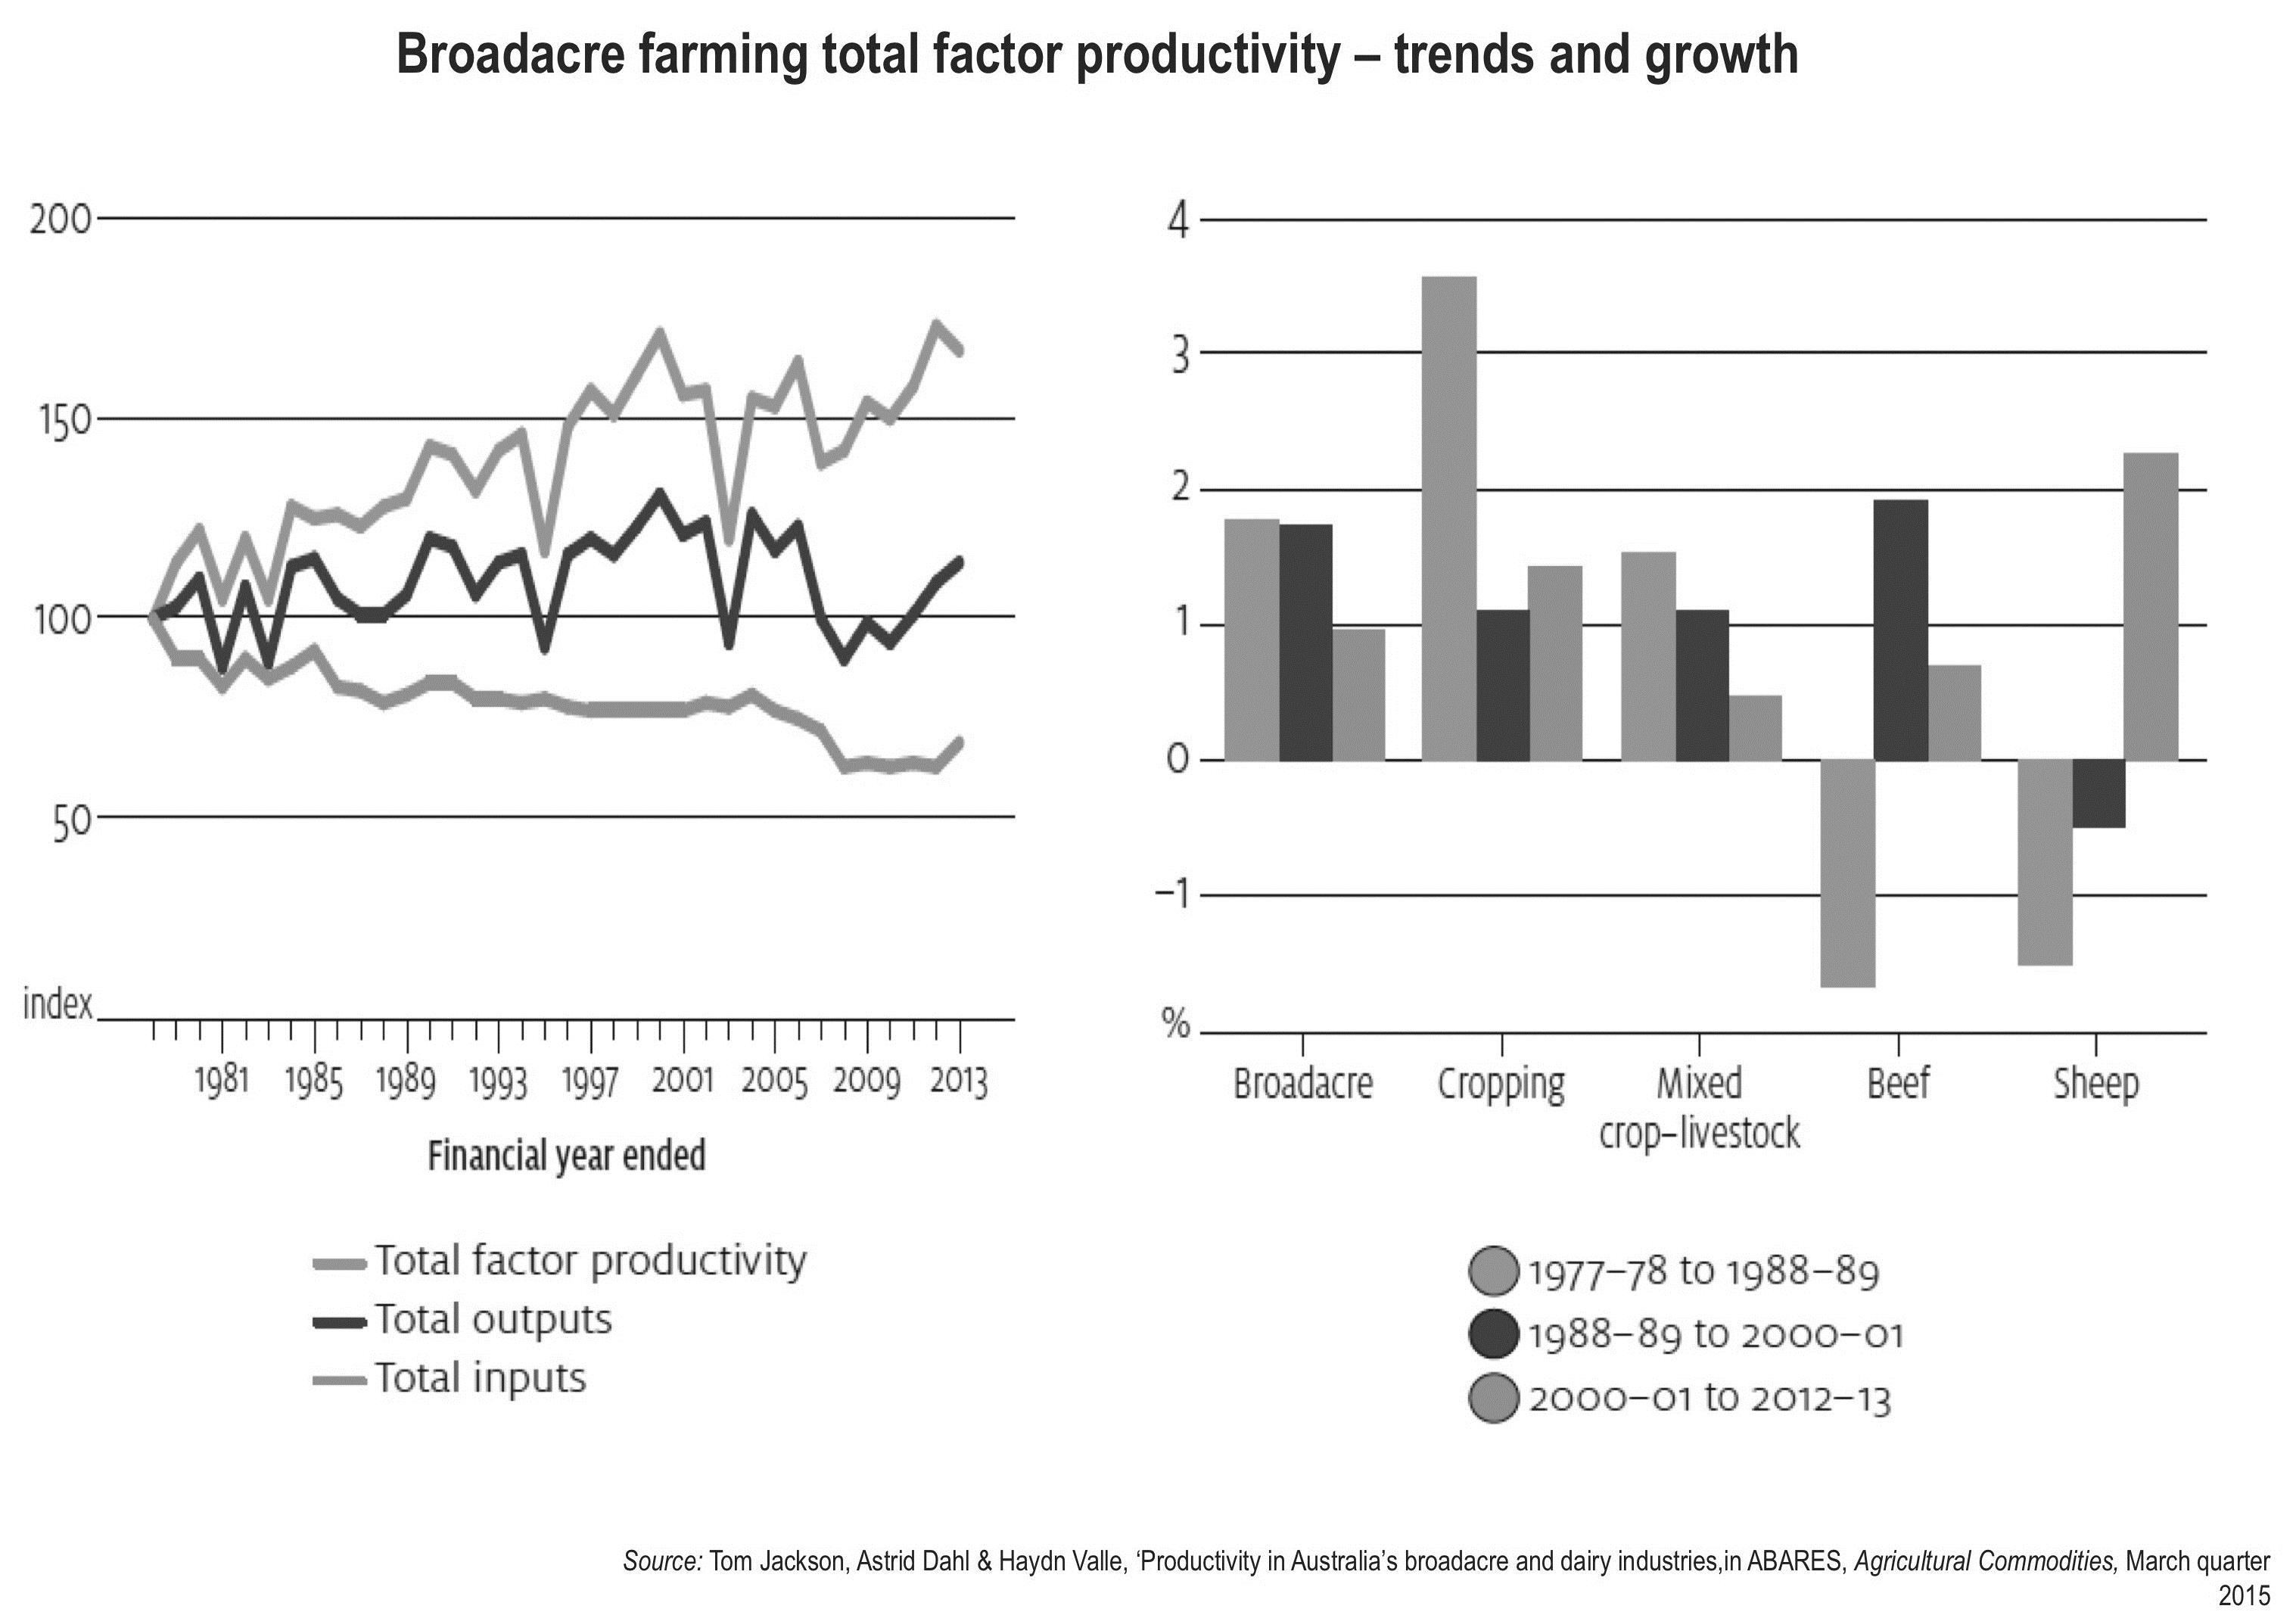 Figure 33: Broadacre farming total factor productivity – trends and growth.